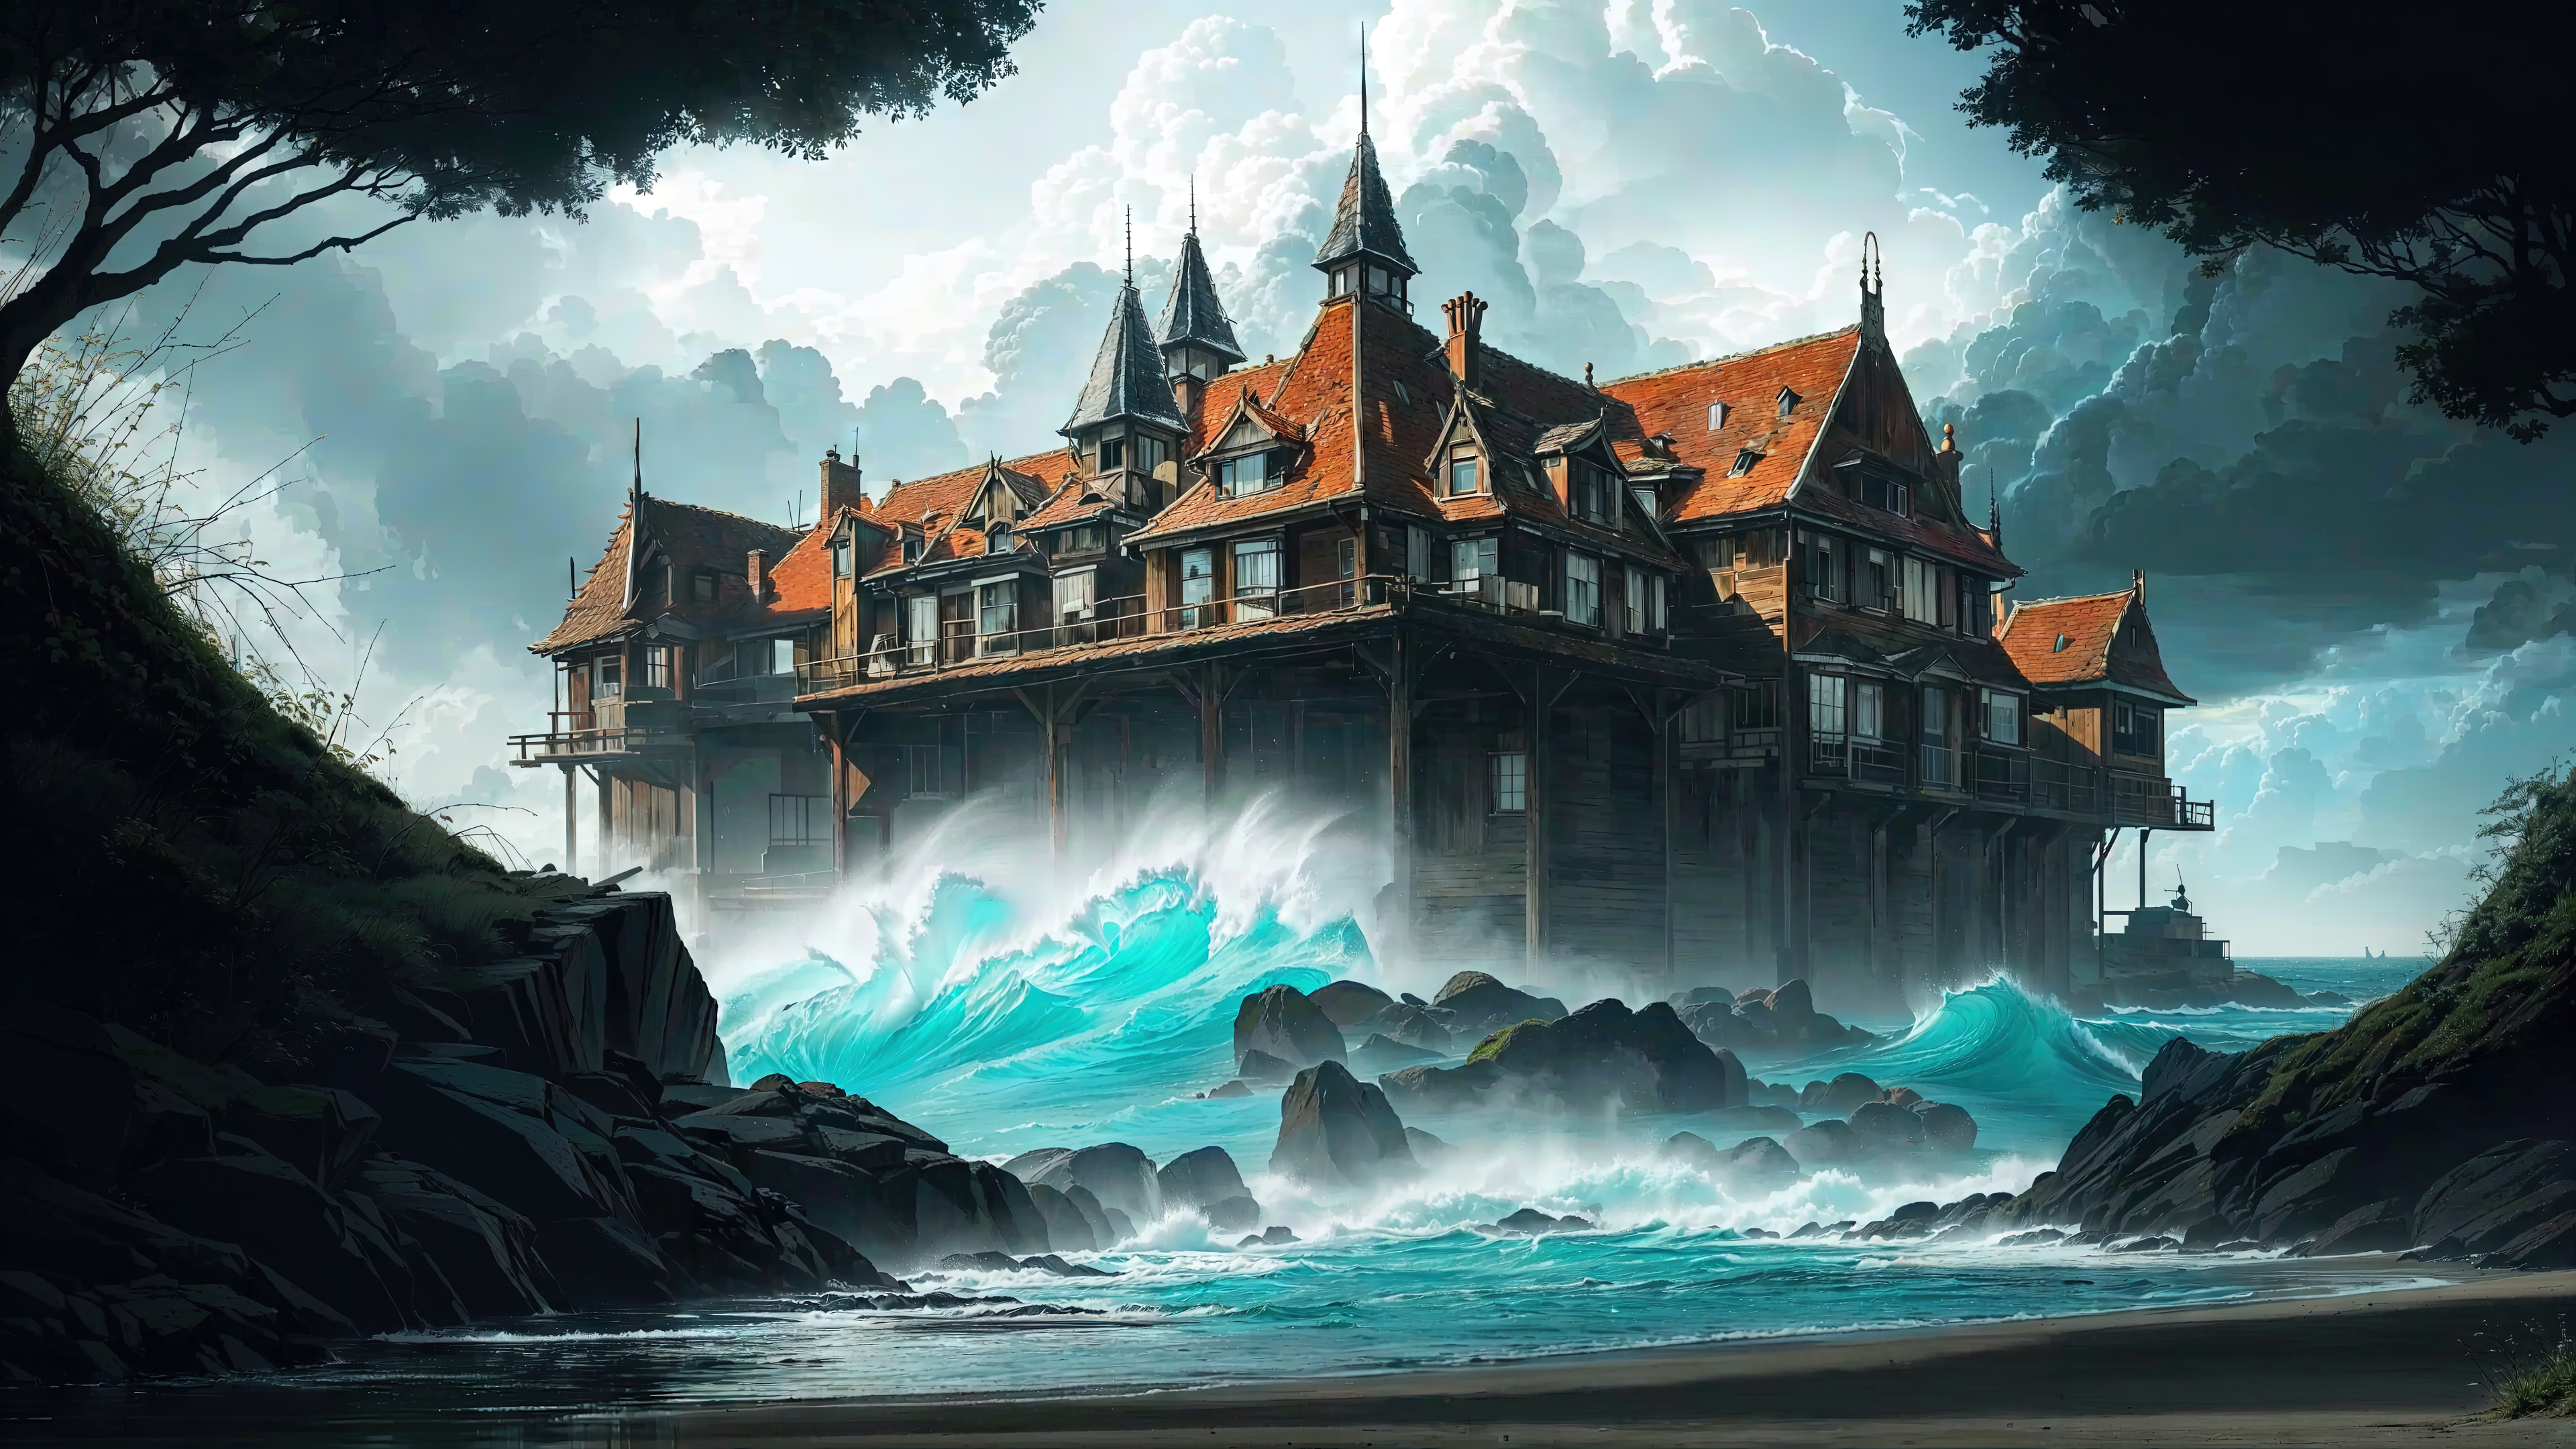 General 3840x2160 AI art 4K architecture building exterior illustration nature outdoors old sea storm DeviantArt water sky clouds waves rocks